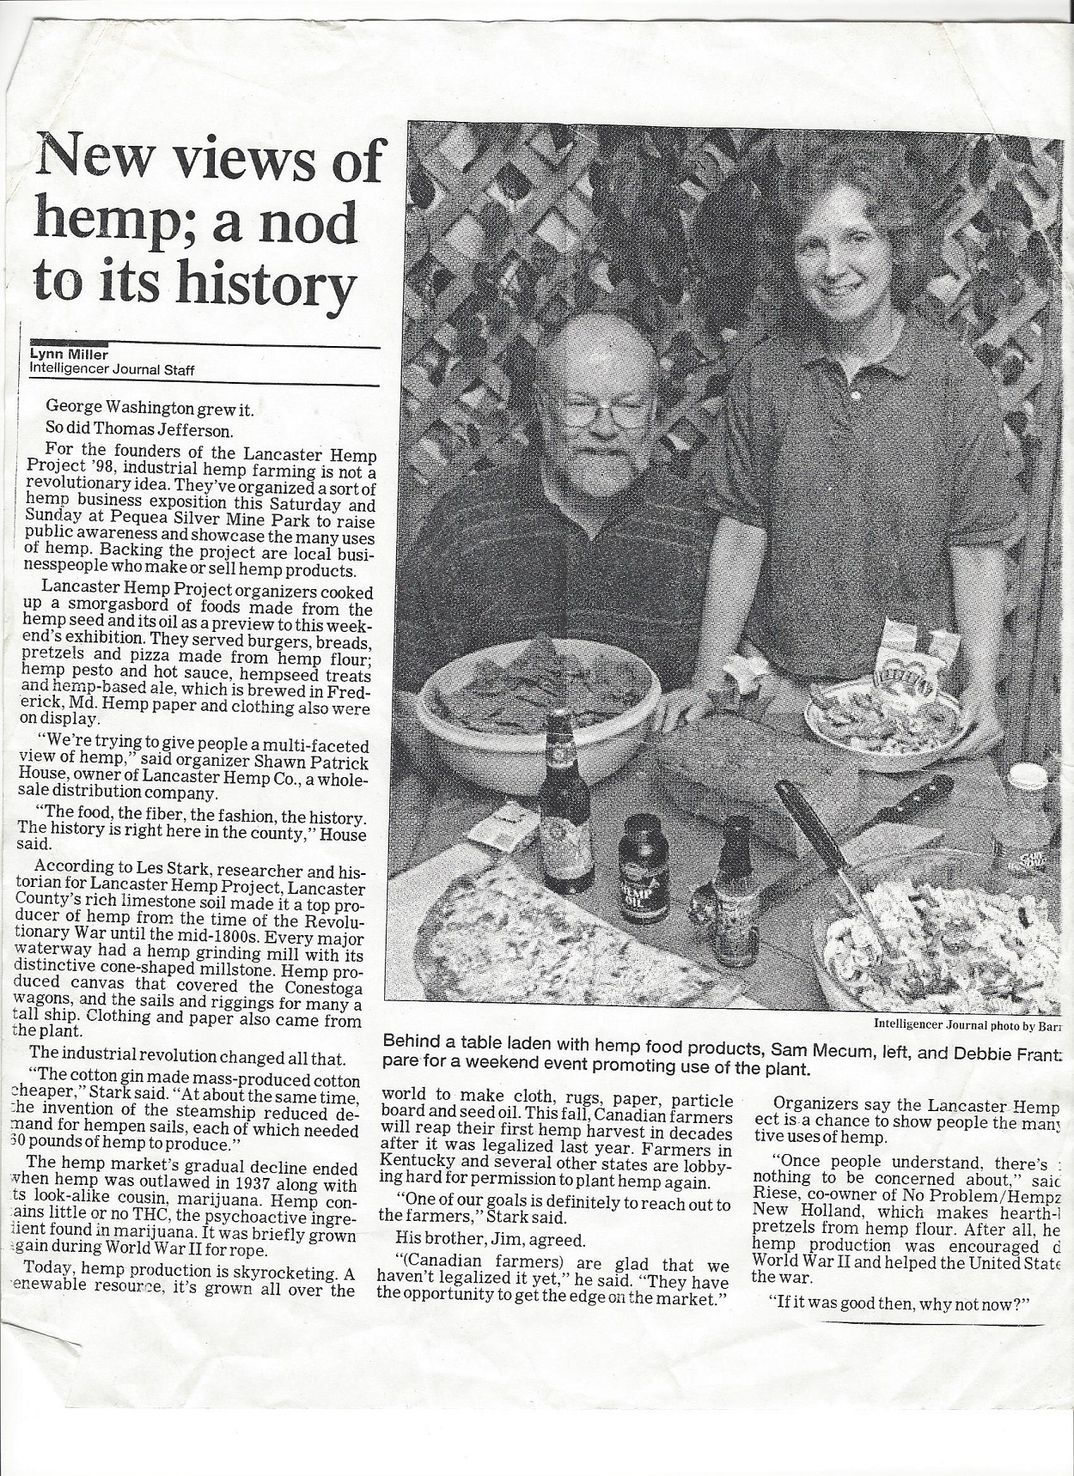 Black & White newpaper with photograph of woman Debbie Franz standing next to husband with hemp foods.